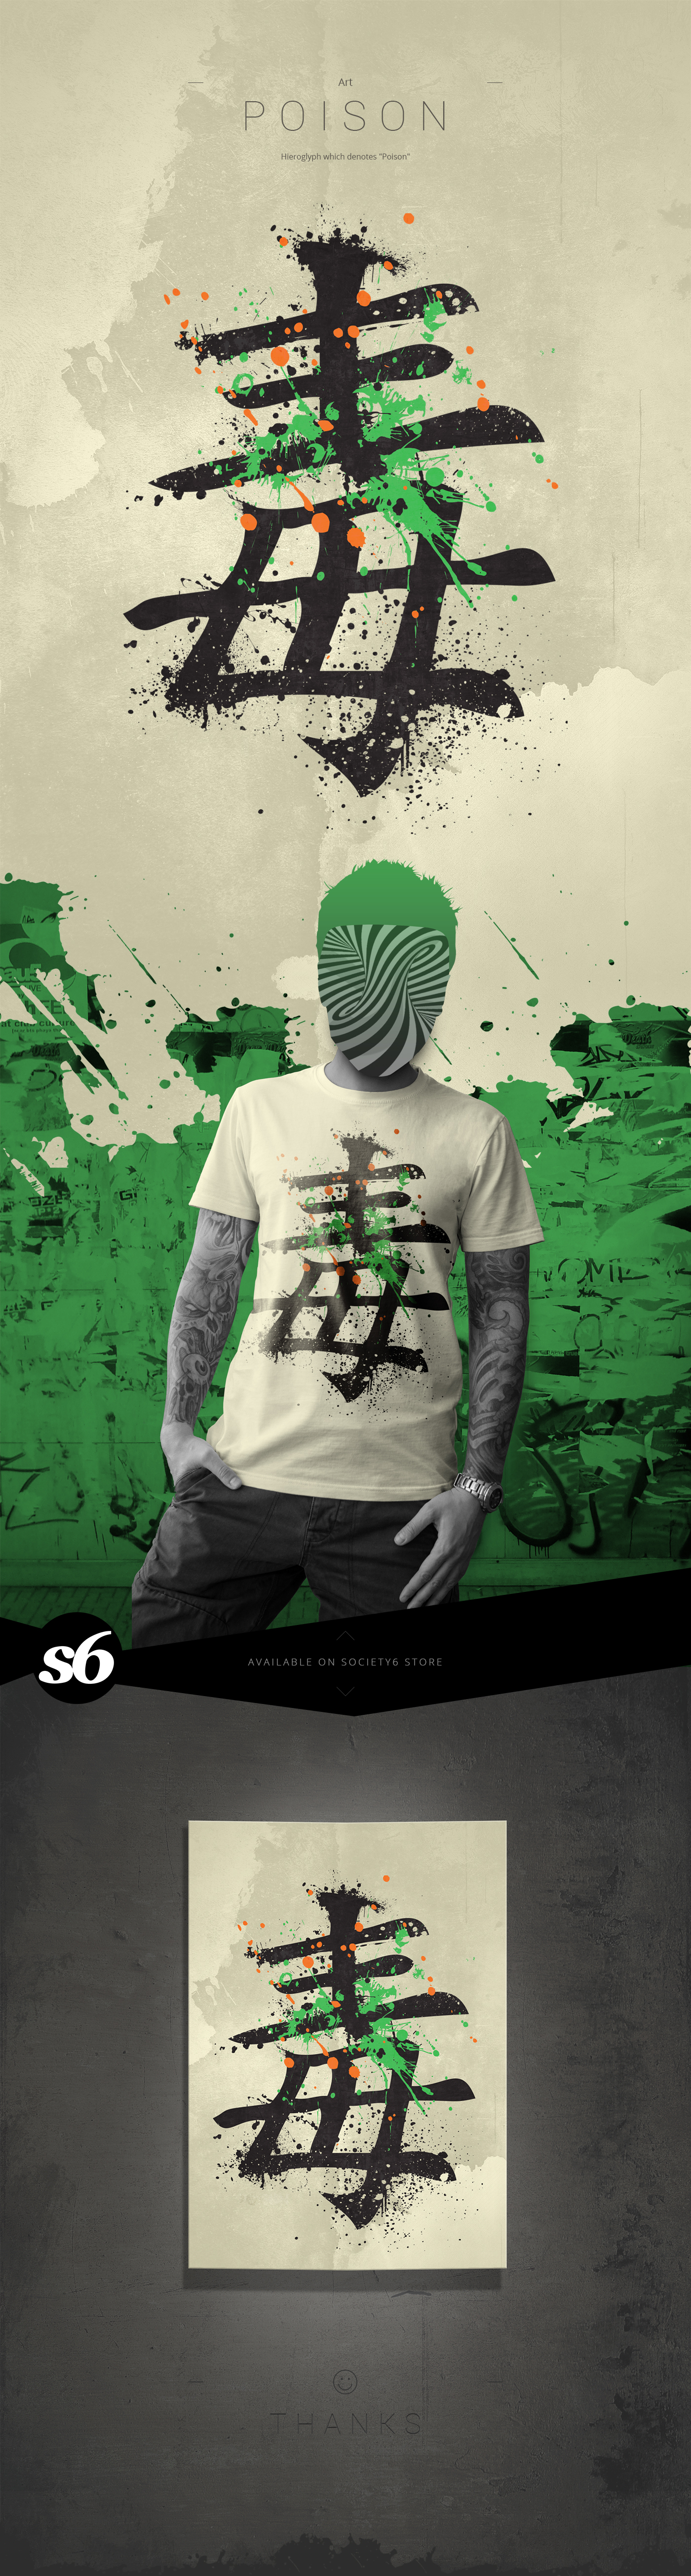 hieroglyph poison art t-shirt splash splash-of-color grungy awesome asia japanese abstract cool Idetification grunge japan